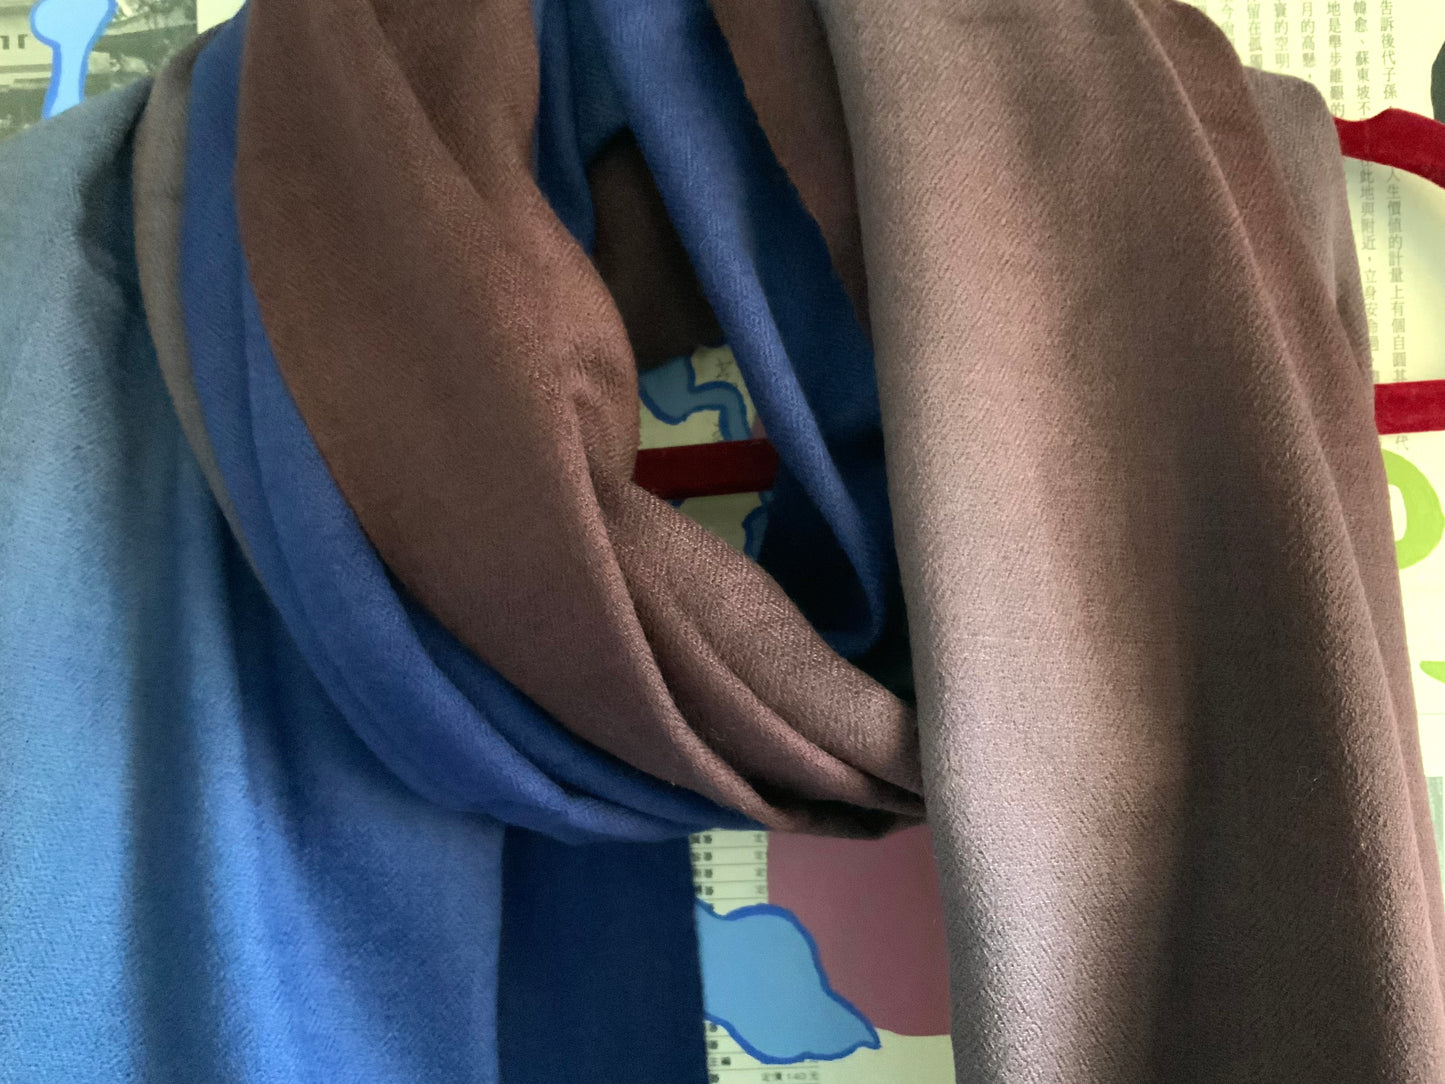 Two tone Kashmir shawl in Brown and Blue #TwoToneKashmirShawl #TrendingShawl #KashmirShawl - DharBazaar